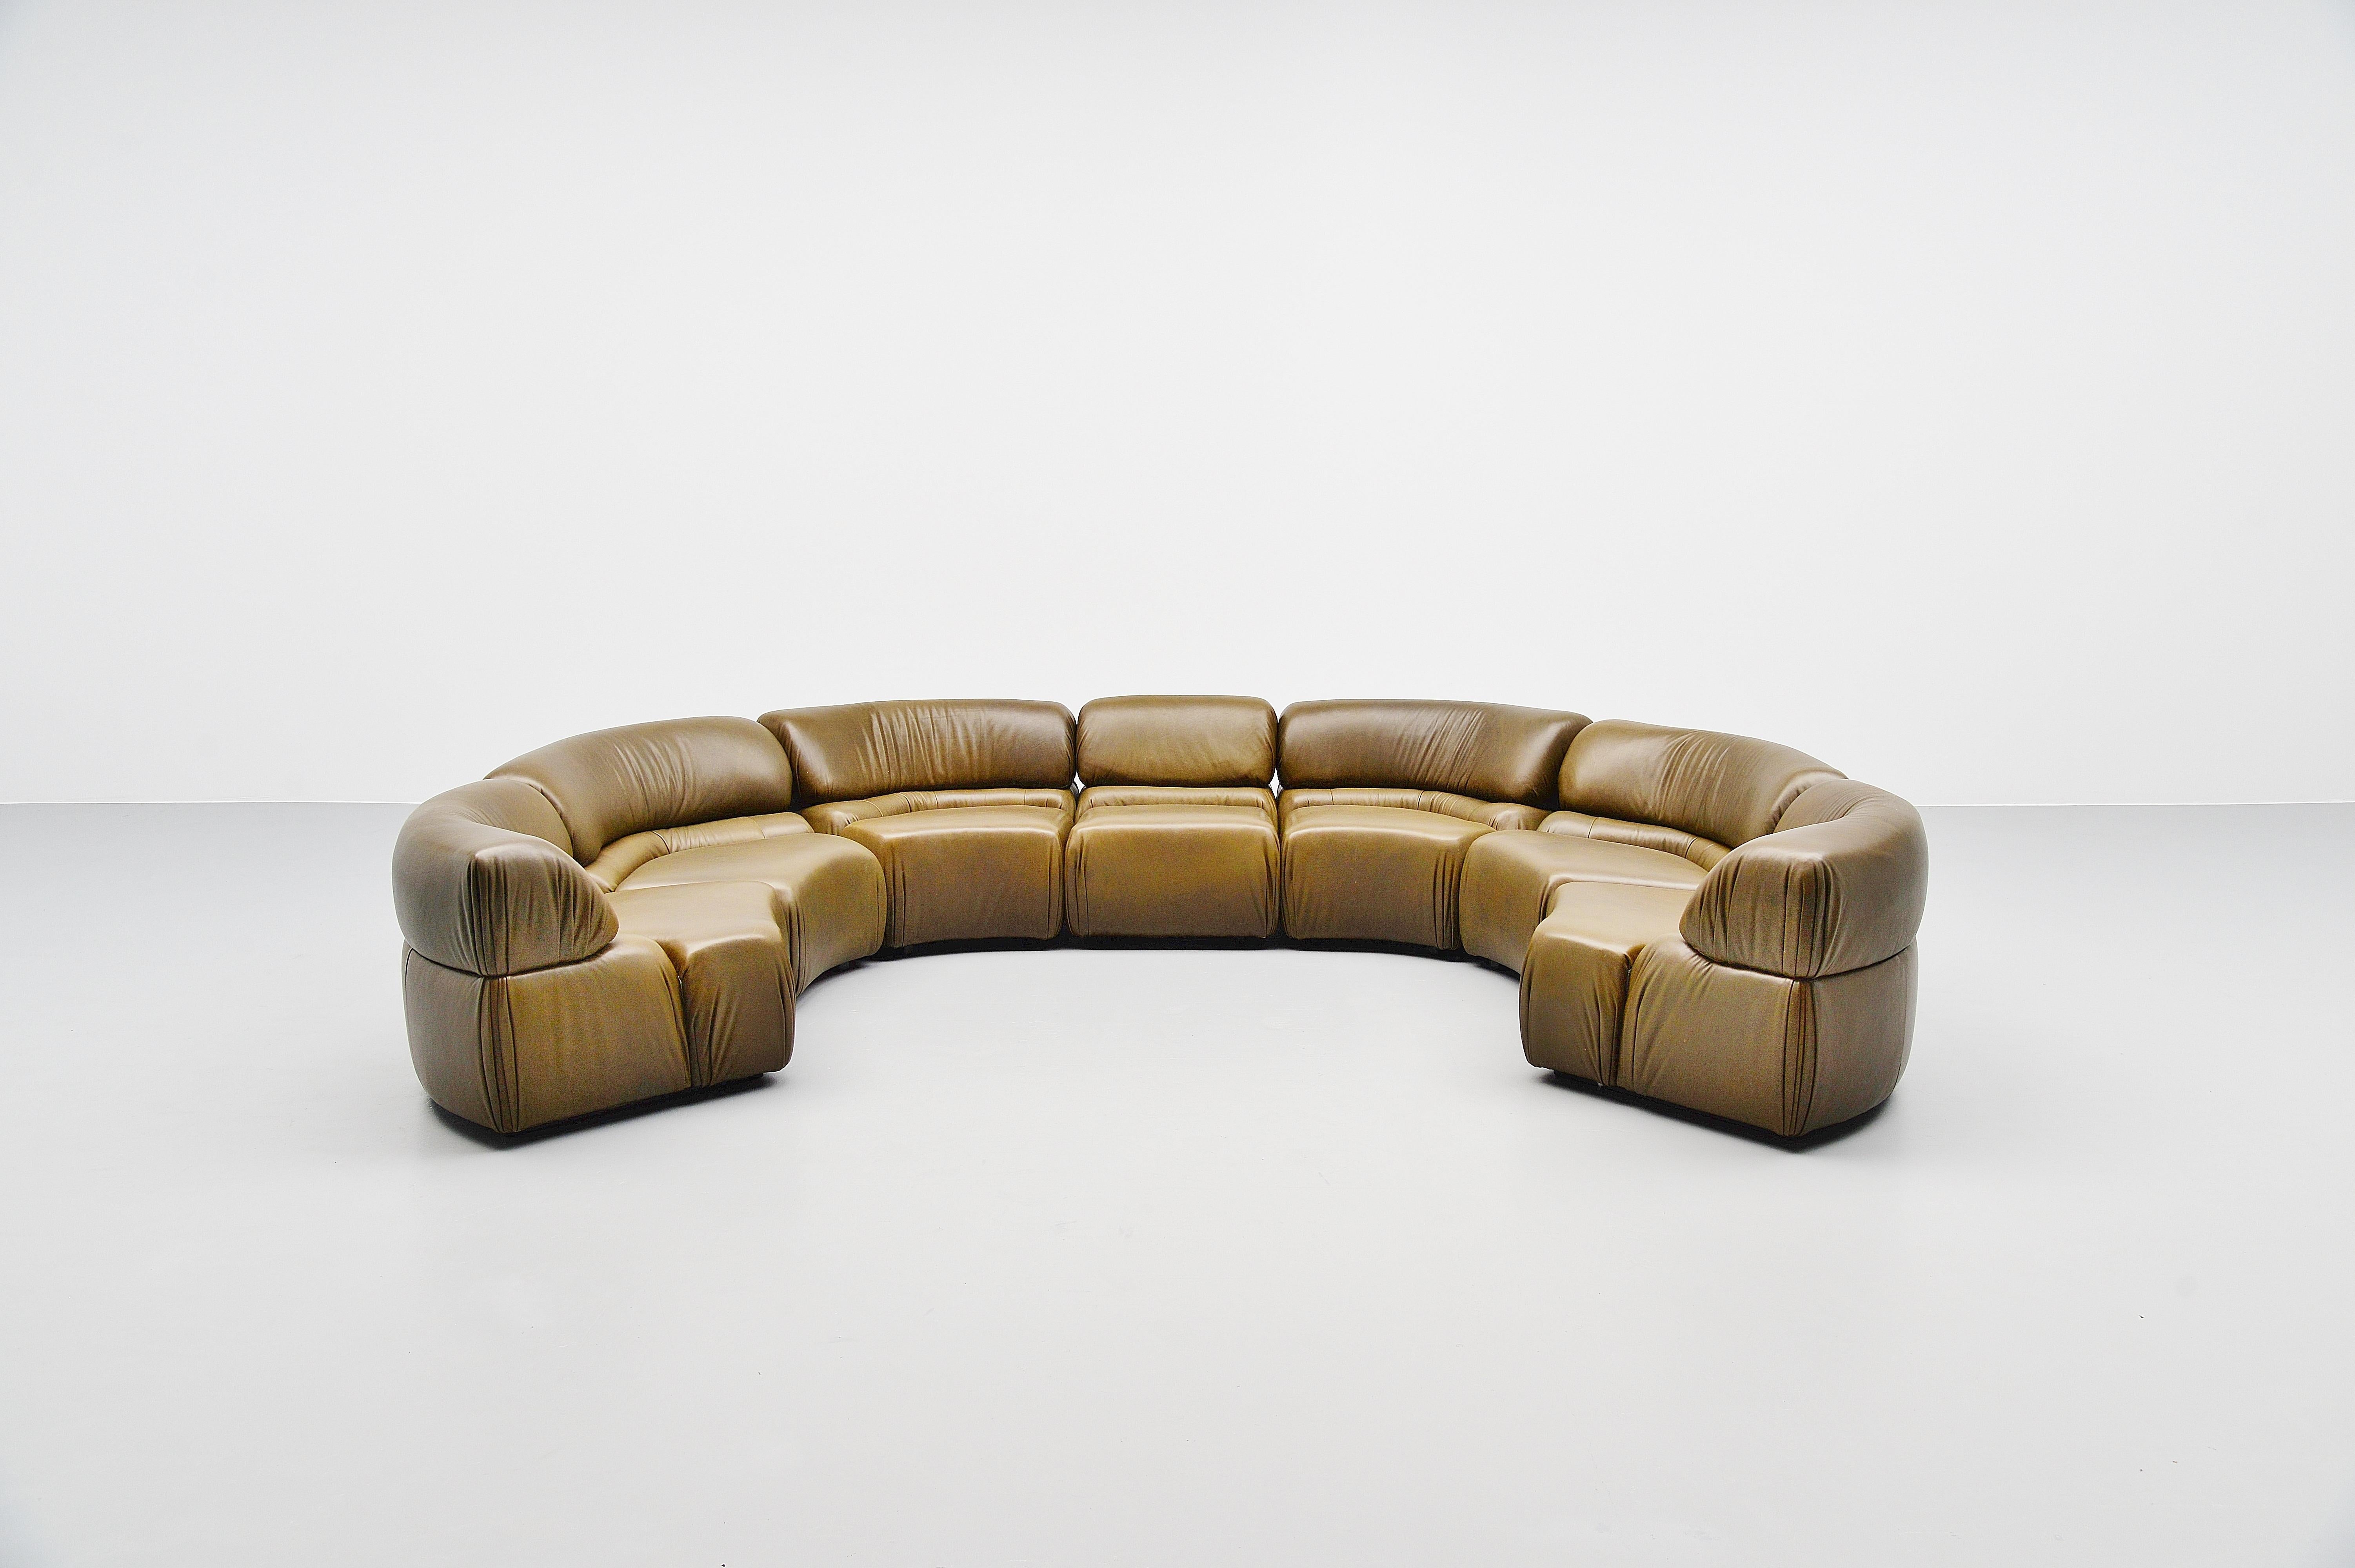 Spectacular an very comfortable so called ‘Cosmos’ elemented sofa designed and manufactured by De Sede, Switzerland, 1970. This sofa has a wooden structure filled with foam and covered with olivegreen buffalo leather. The sofa is in very nice olive